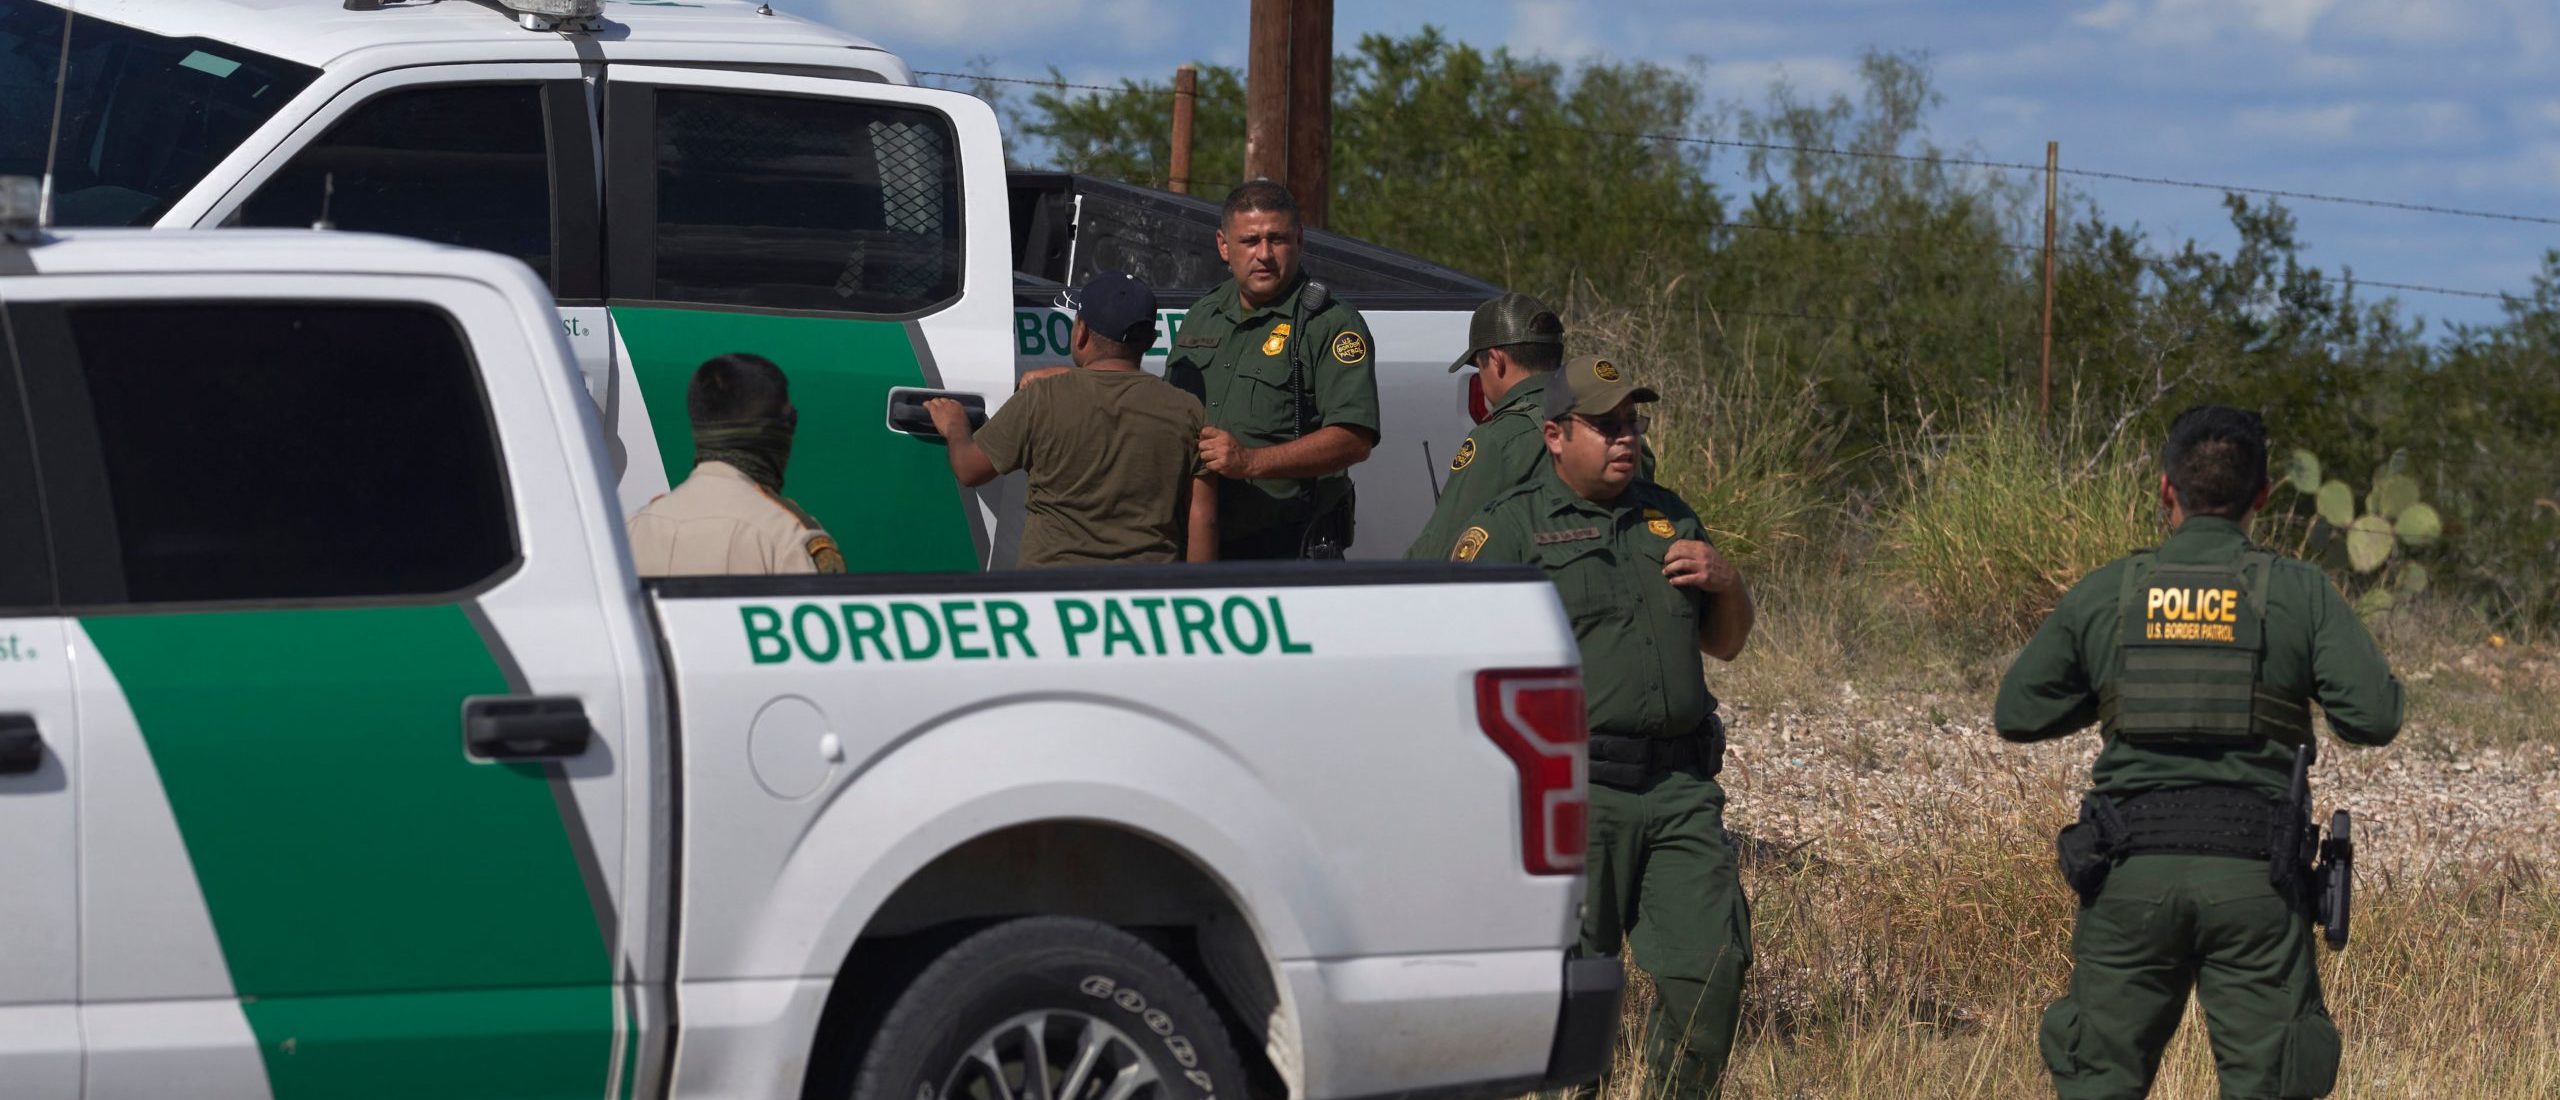 An illegal migrant found smuggled in a vehicle is apprehended by US Border Patrol and the Webb County Sheriff on October 12, 2022 in Laredo, Texas. (Photo by allison dinner / AFP) (Photo by ALLISON DINNER/AFP via Getty Images)